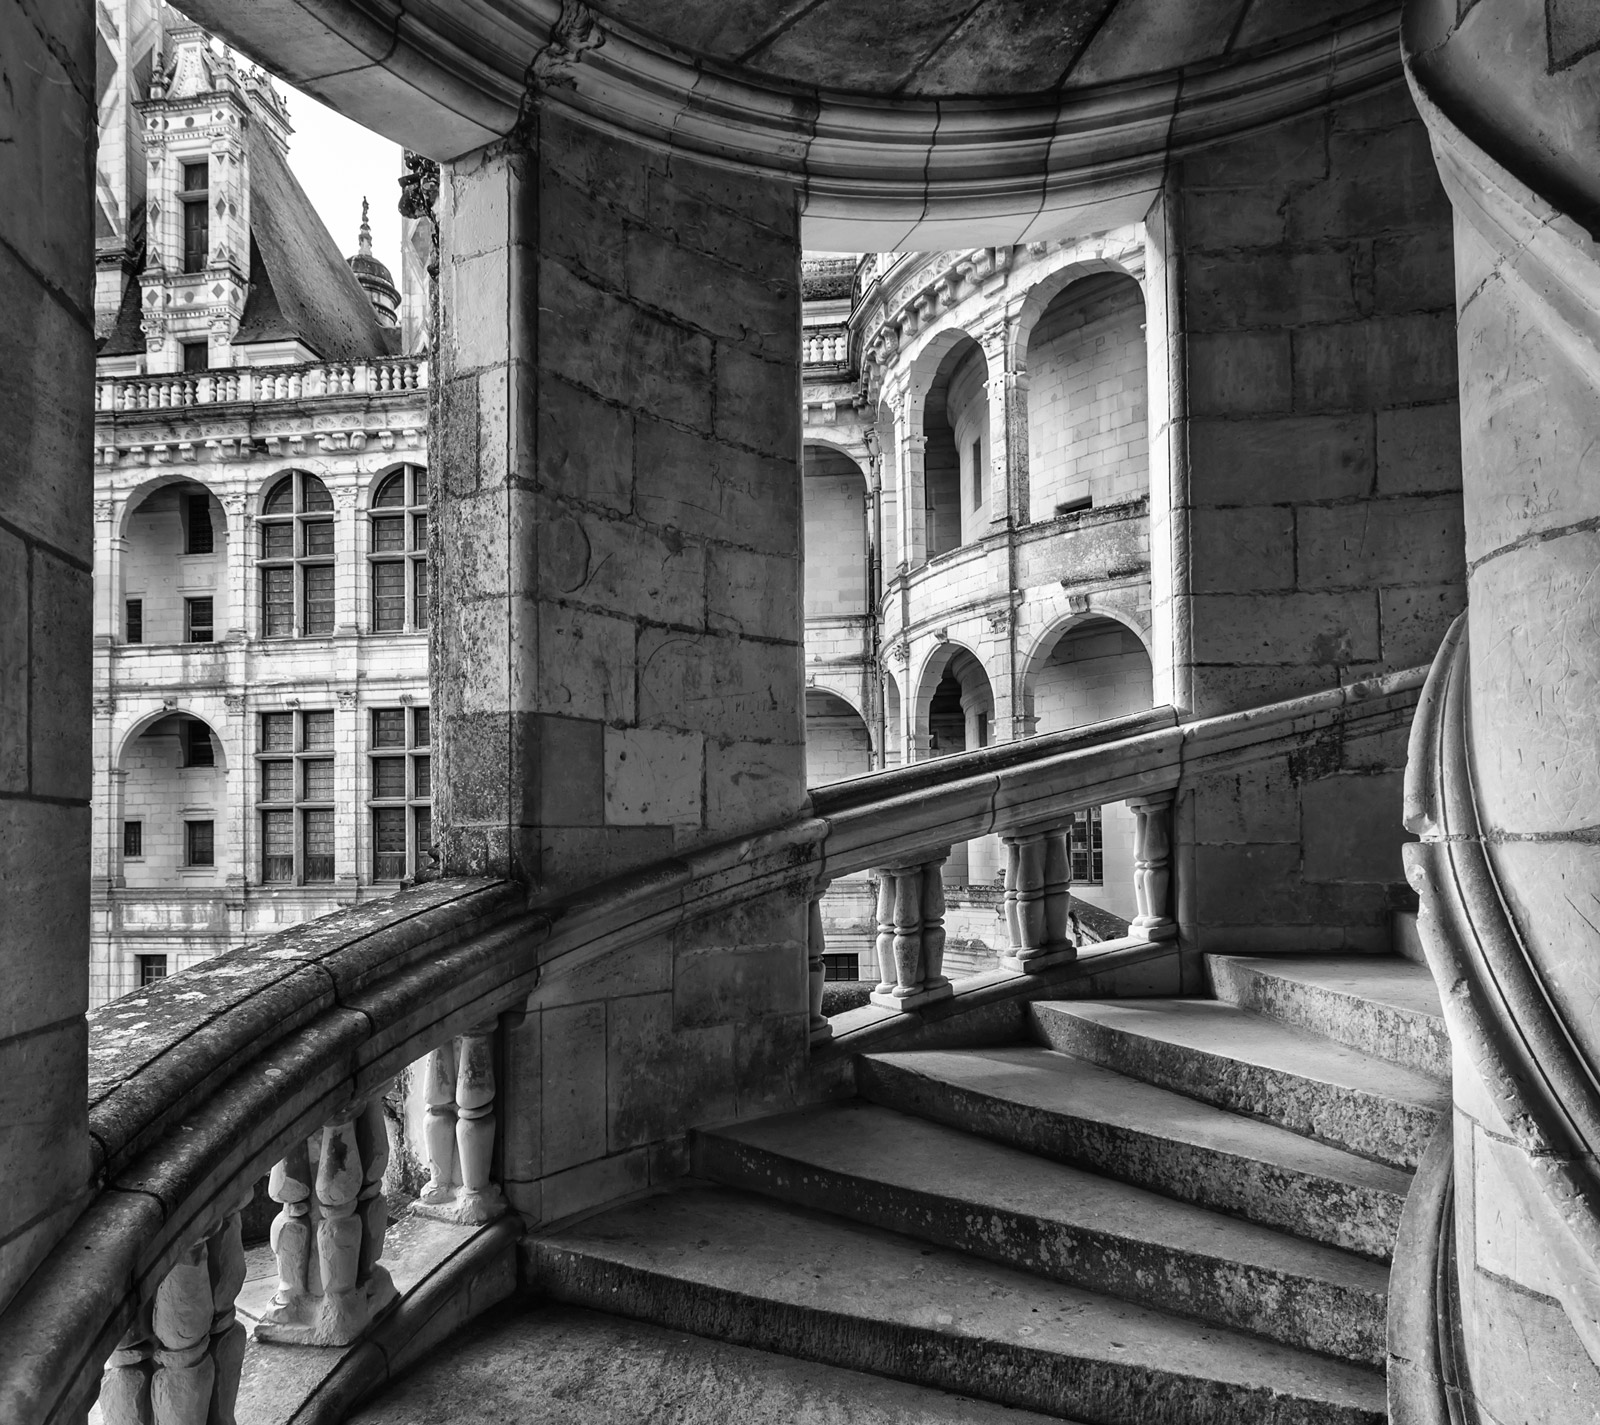 The kings stairway overlooking the keep at chateau de chambord in france